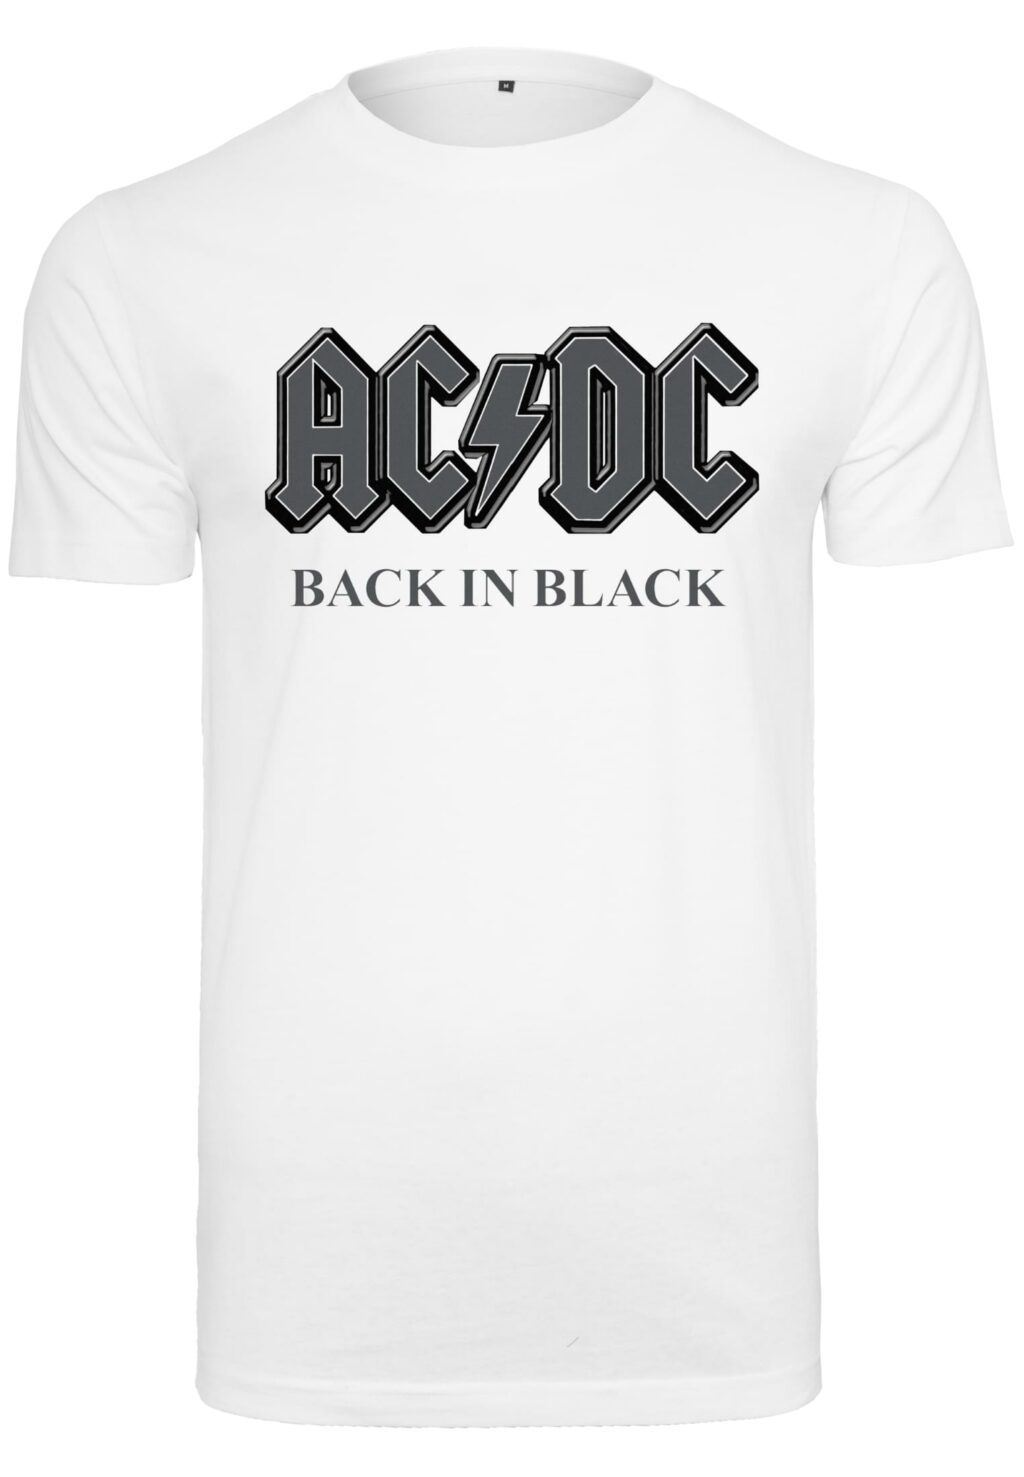 ACDC Back In Black Tee white MC480